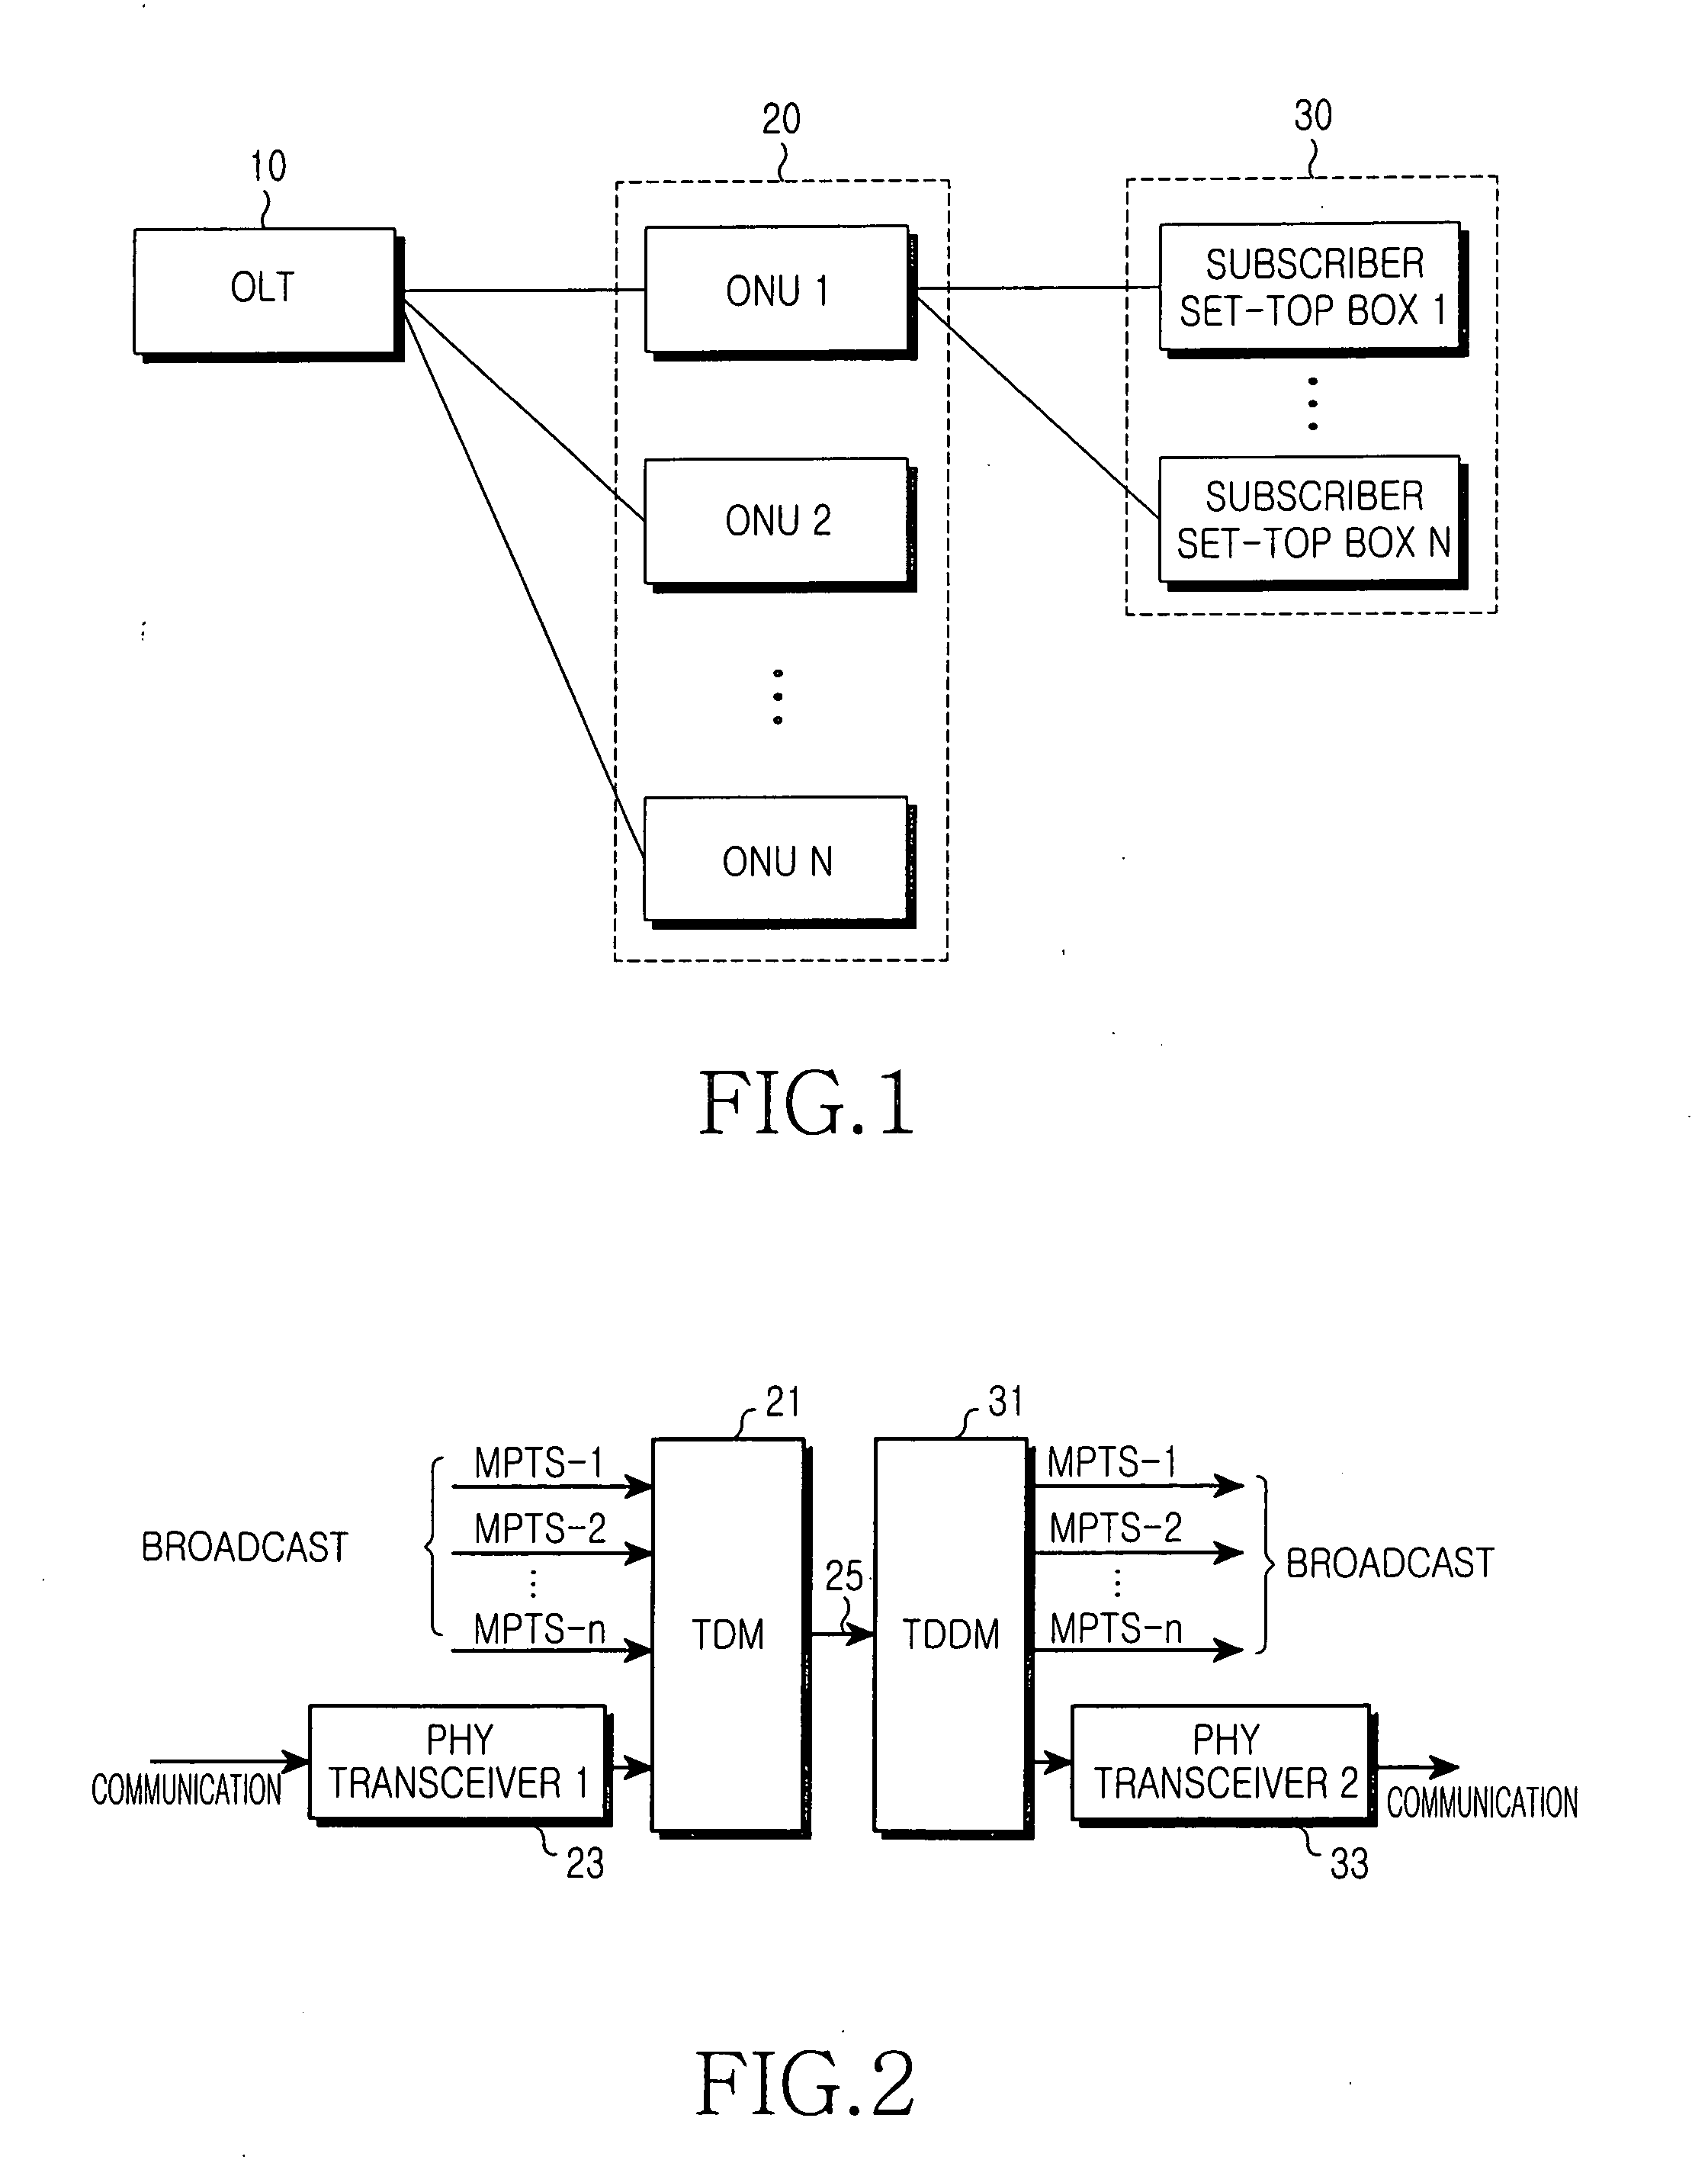 Method for transmitting and receiving ethernet data in system based on broadcast/communication convergence